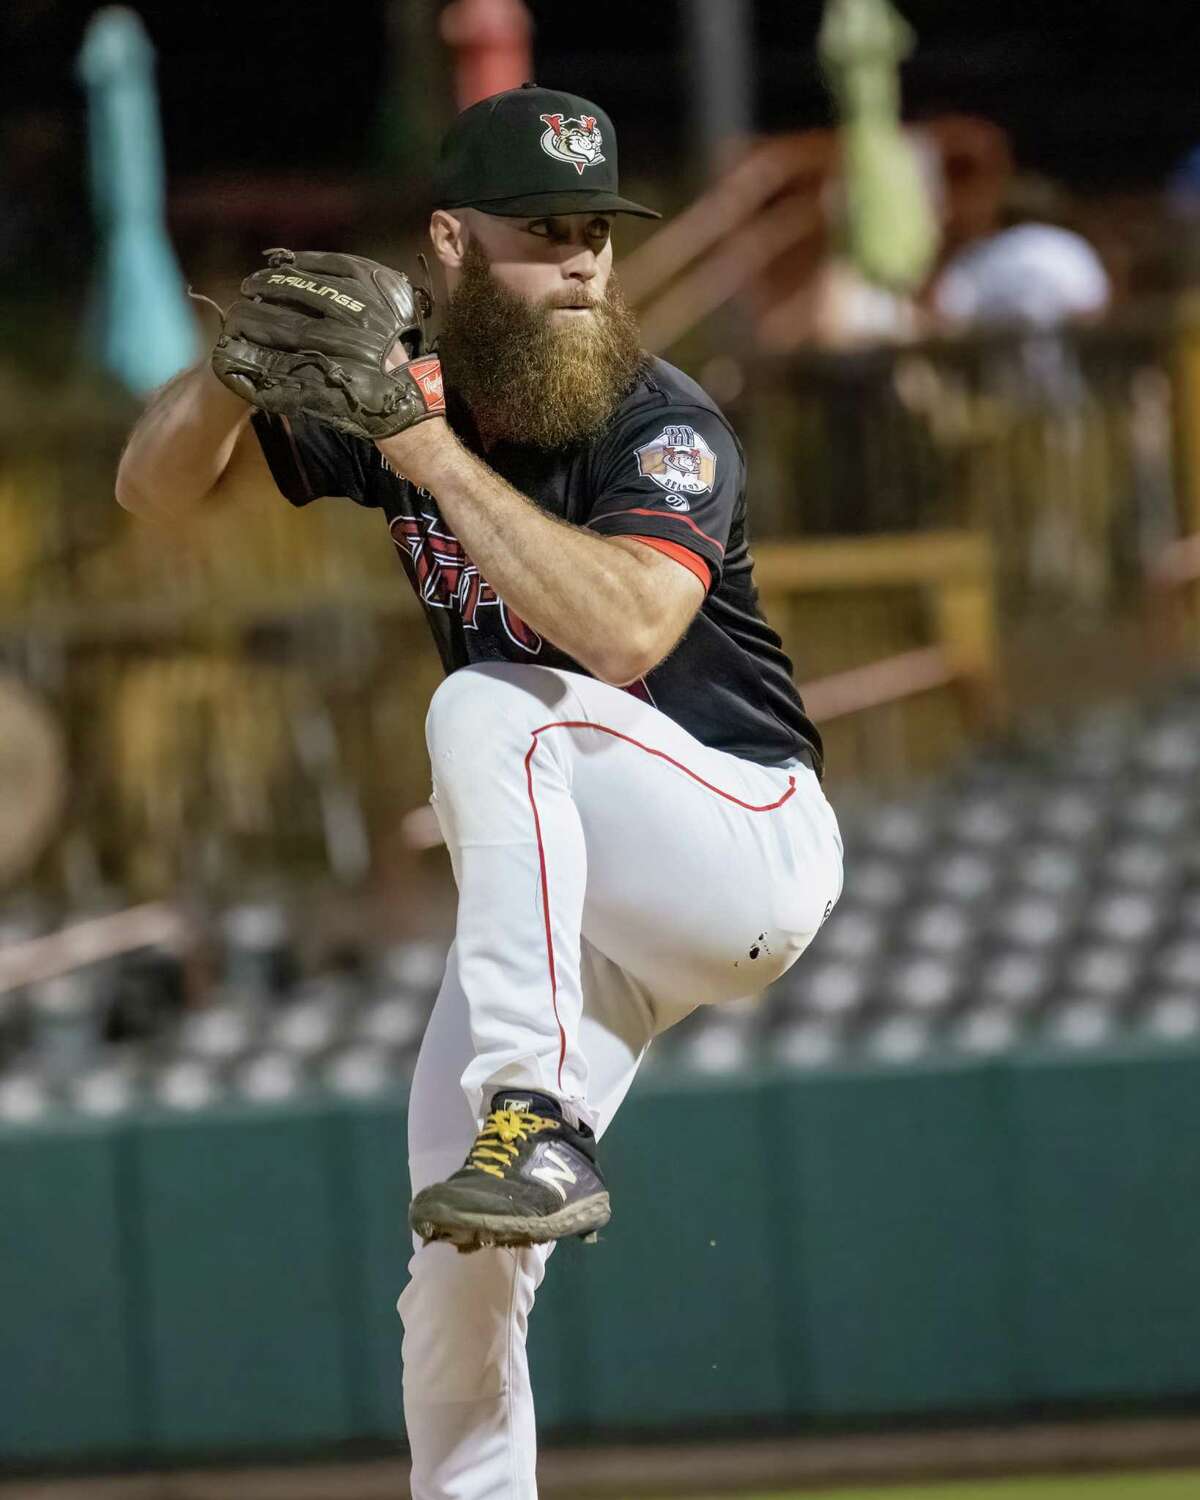 Tri-City ValleyCats pitcher Marshall Winn works during a Frontier League game against the Empire State Greys at the Joseph L. Bruno Stadium on the Hudson Valley Community College campus in Troy, NY, on Saturday, June 2, 2022. (Jim Franco/Special to the Times Union)